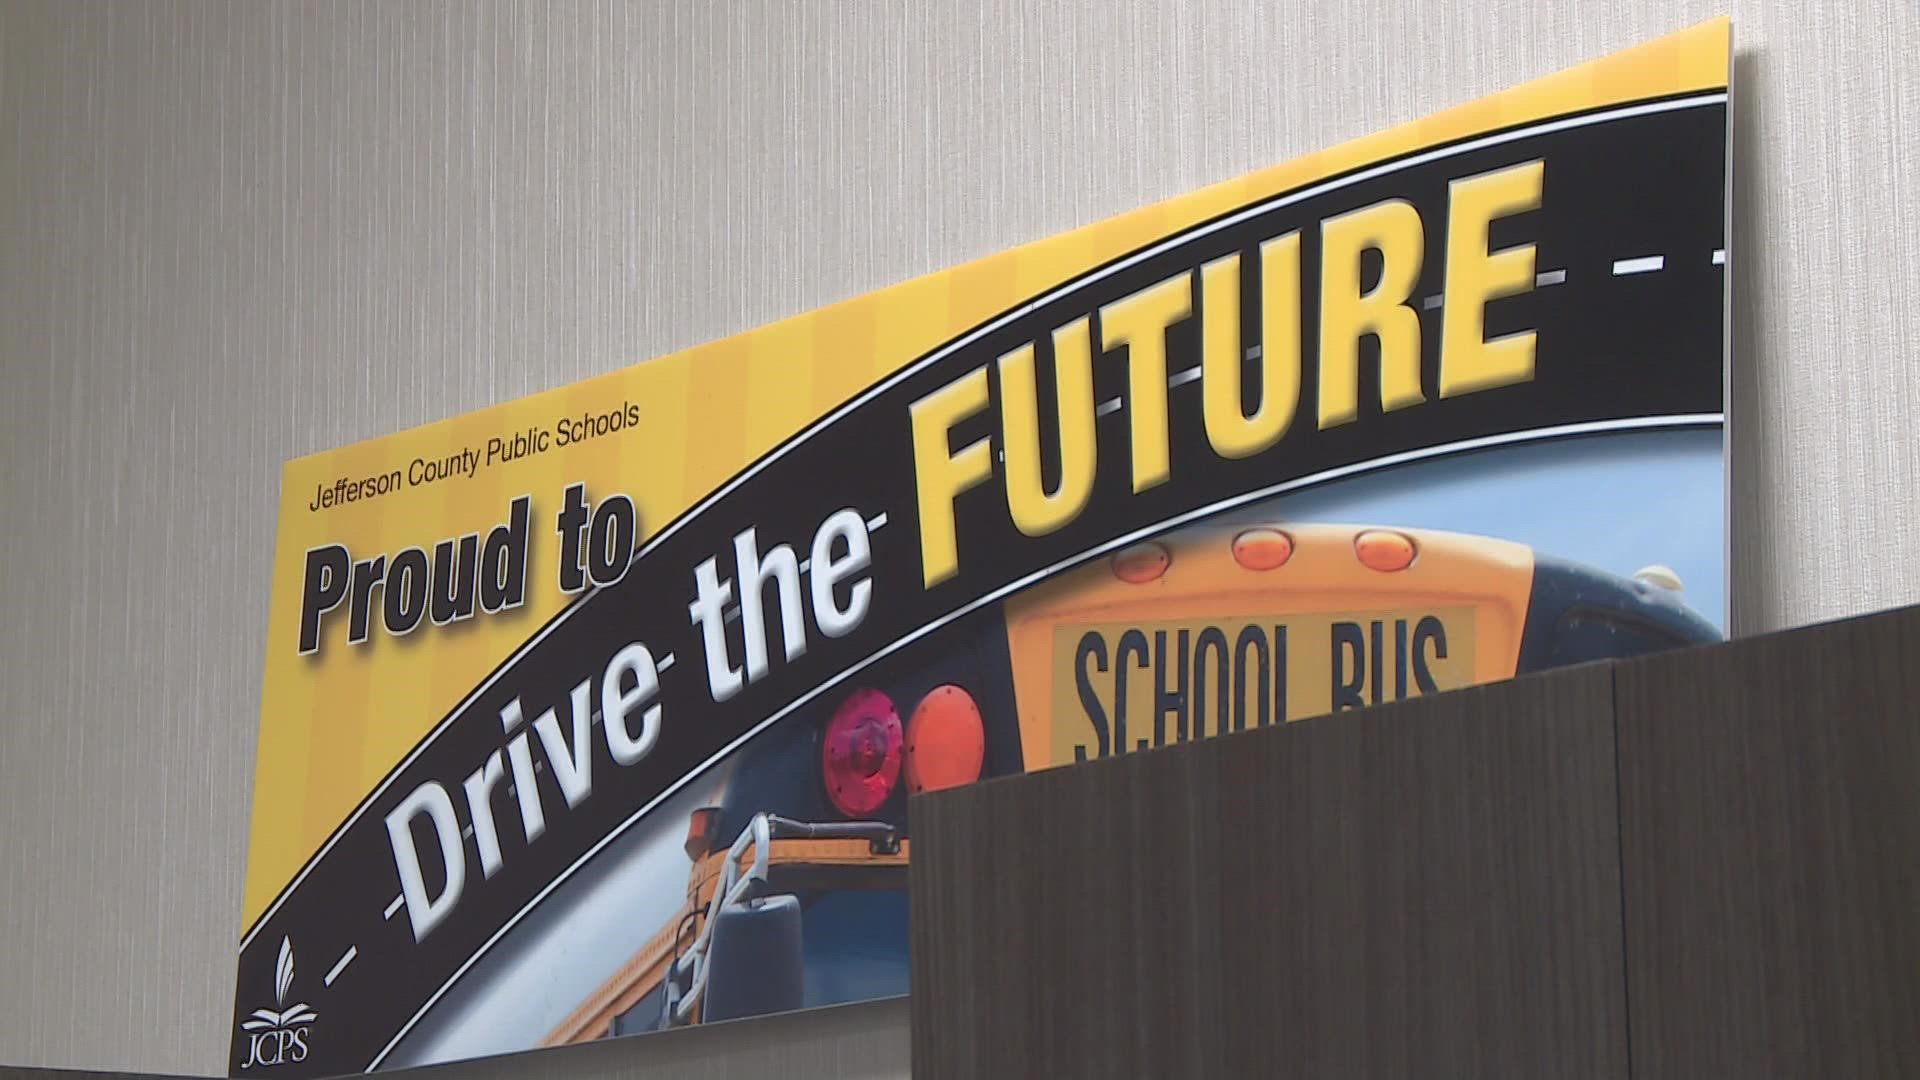 Kentucky's largest school district needs 100 bus drivers and held a large hiring event at its C.B. Young Center on Monday.